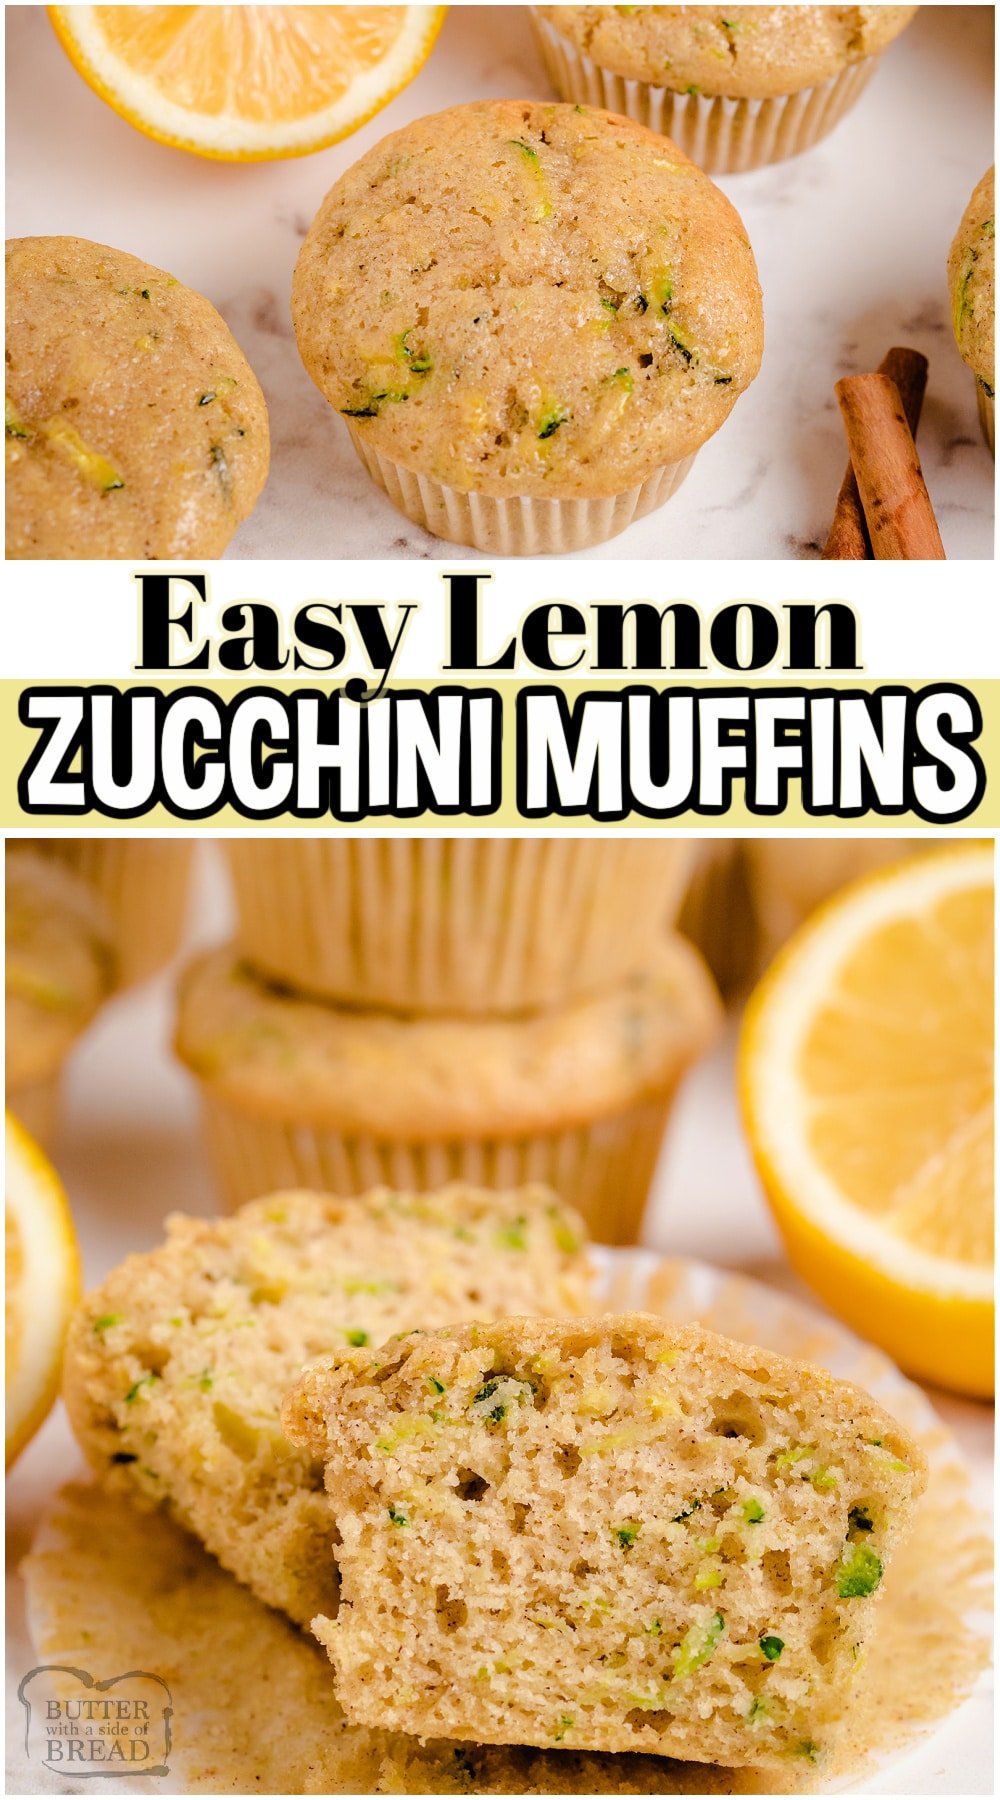 Tender Lemon Zucchini Muffins made with classic ingredients and fresh zucchini overflowing from the garden! Sweet homemade muffins spiced with vanilla and cinnamon & brushed with a tangy lemon glaze. 